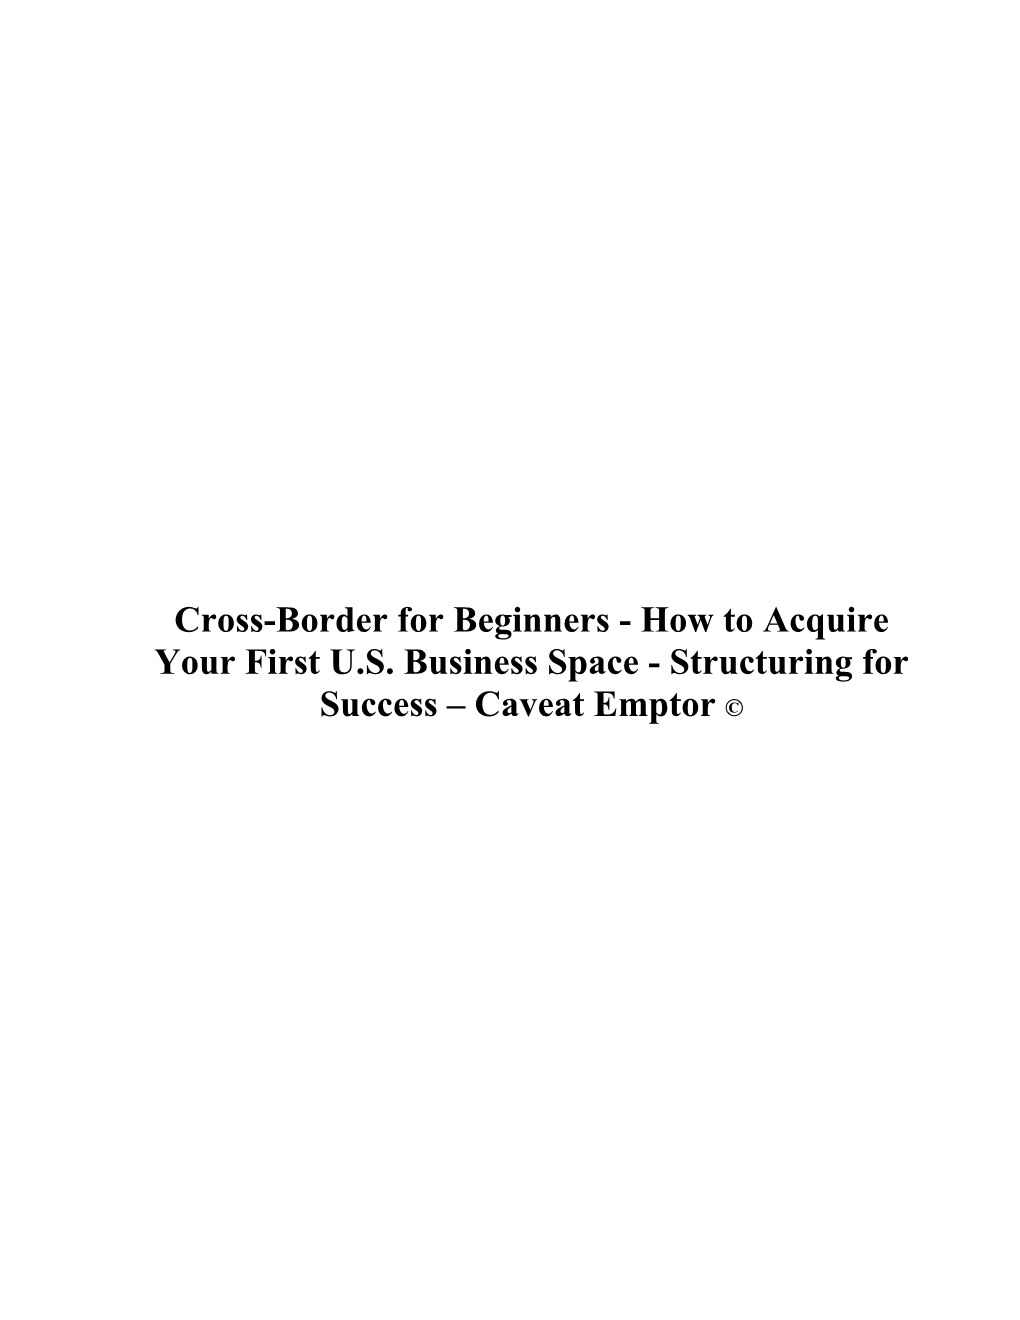 Cross-Border for Beginners - How to Acquire Your First U.S